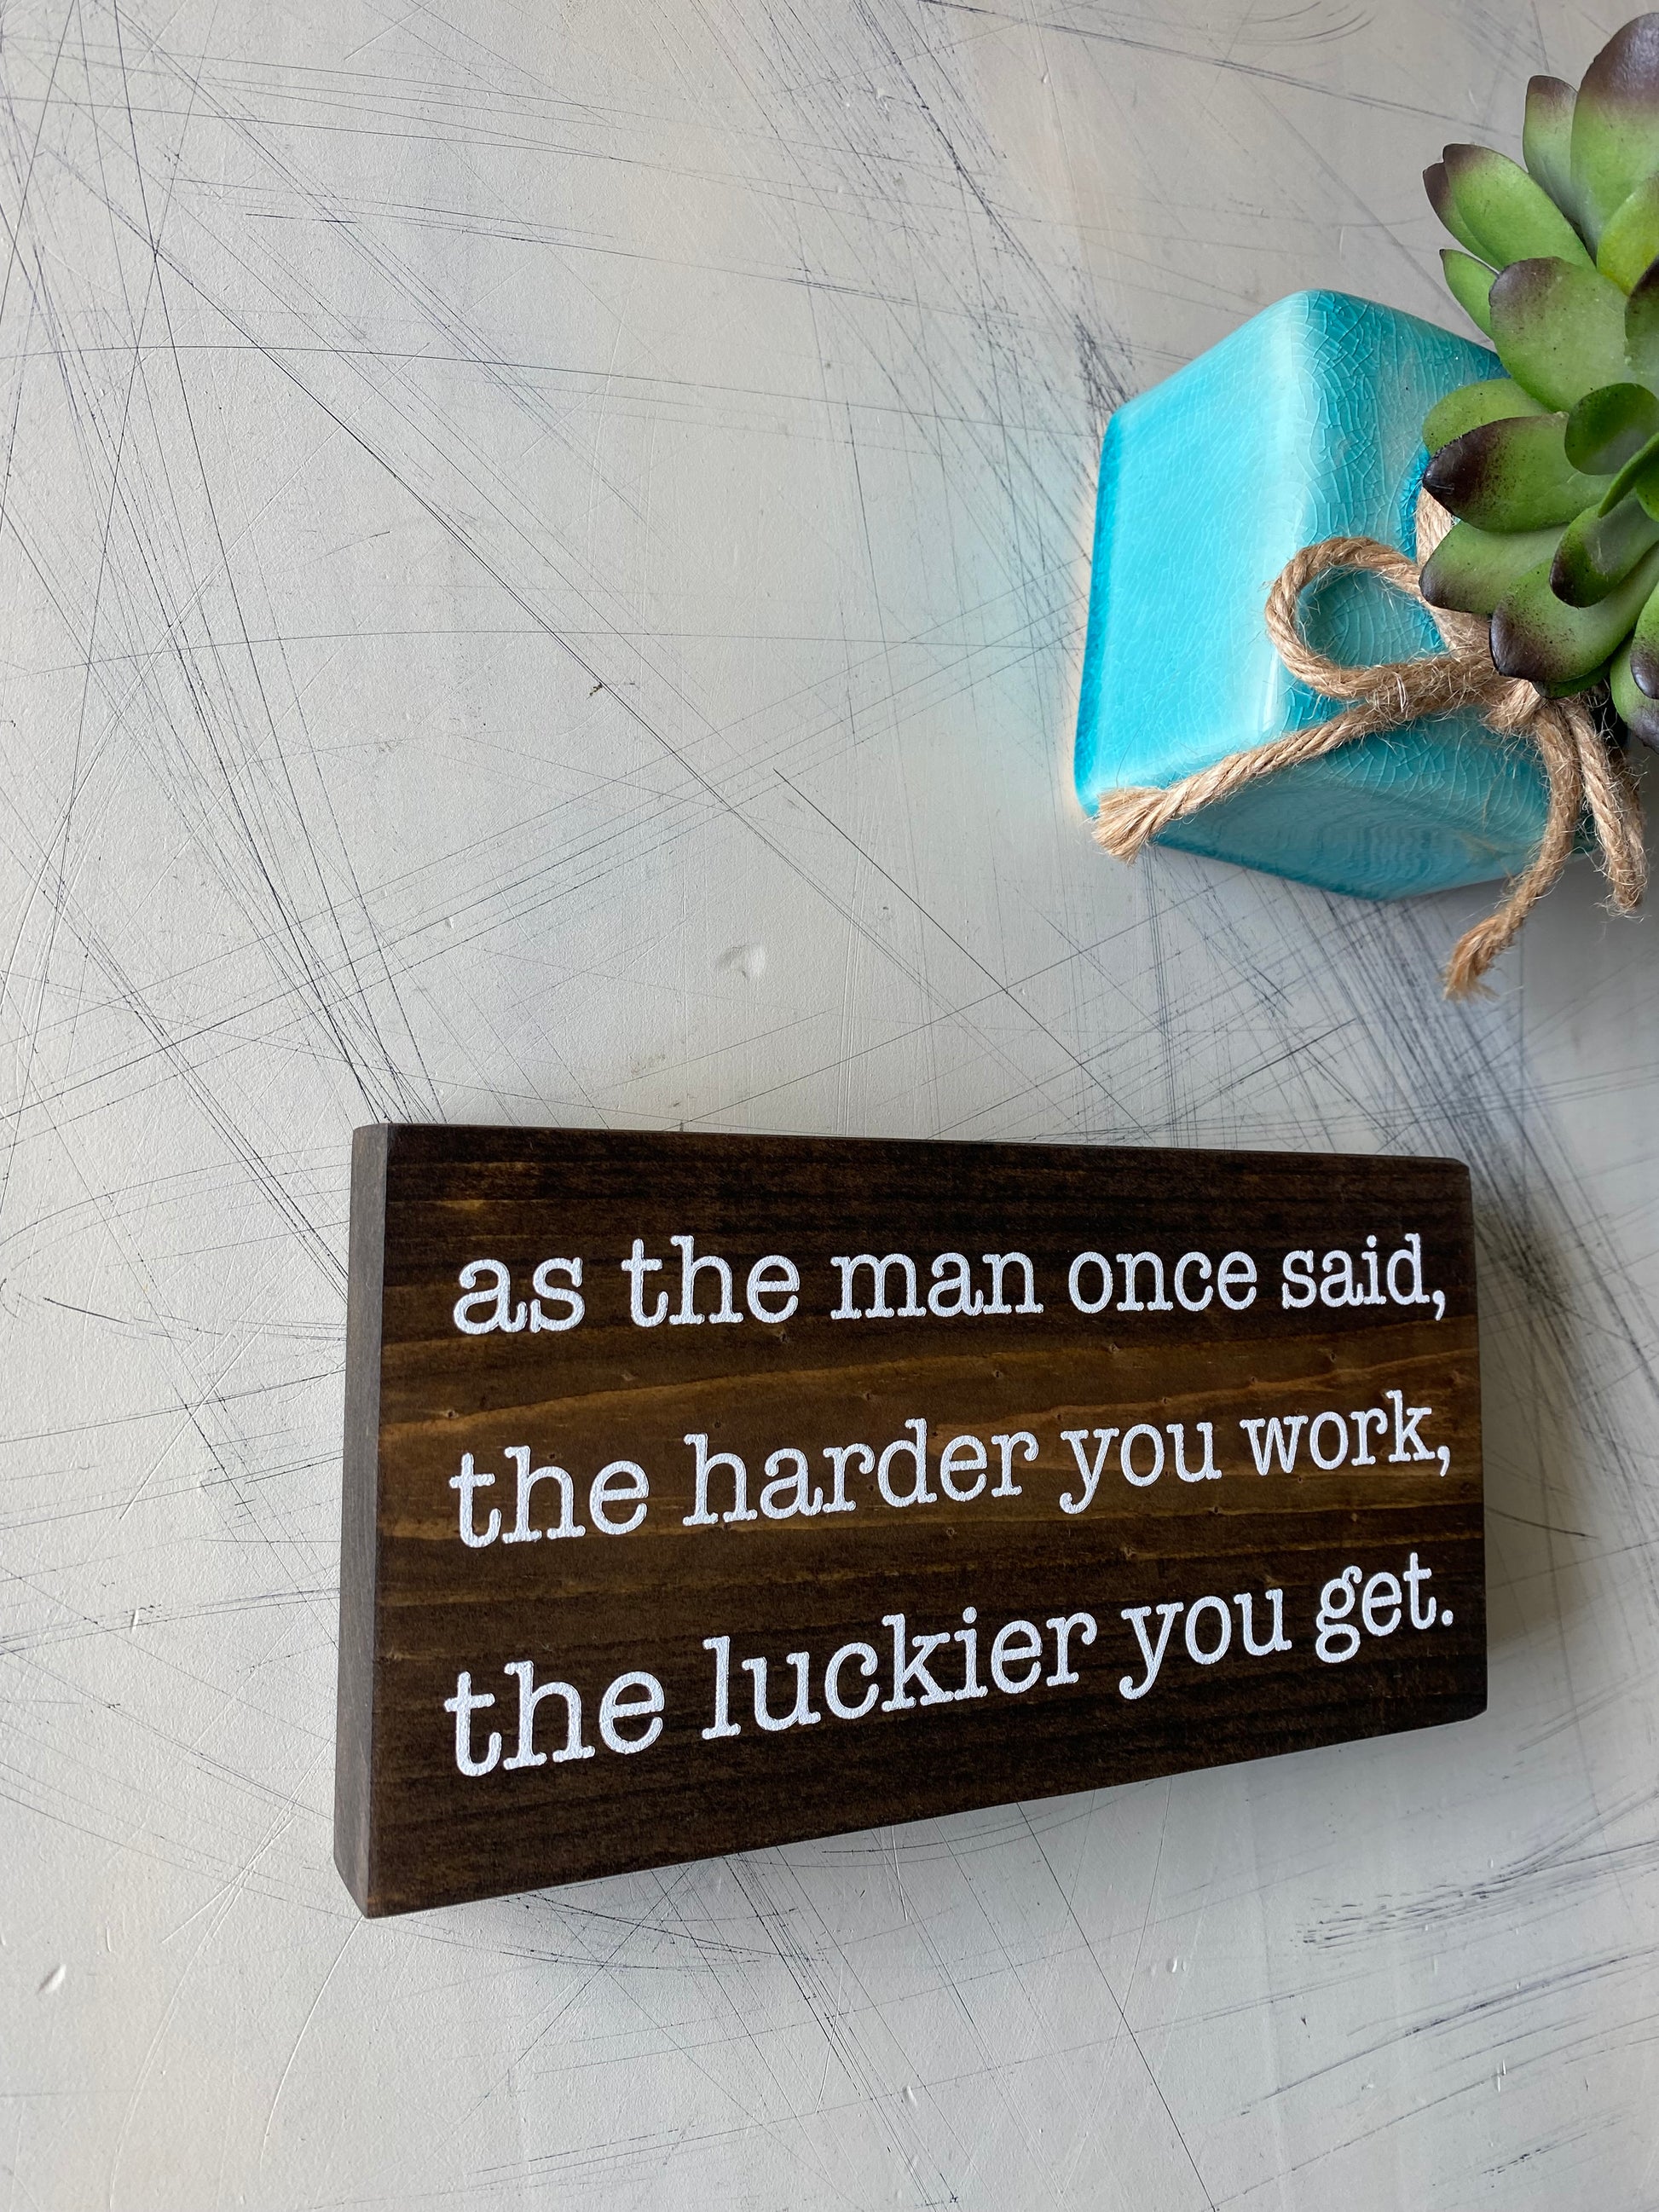 As the man once said, the harder you work, the luckier you get. - handmade mini wood sign